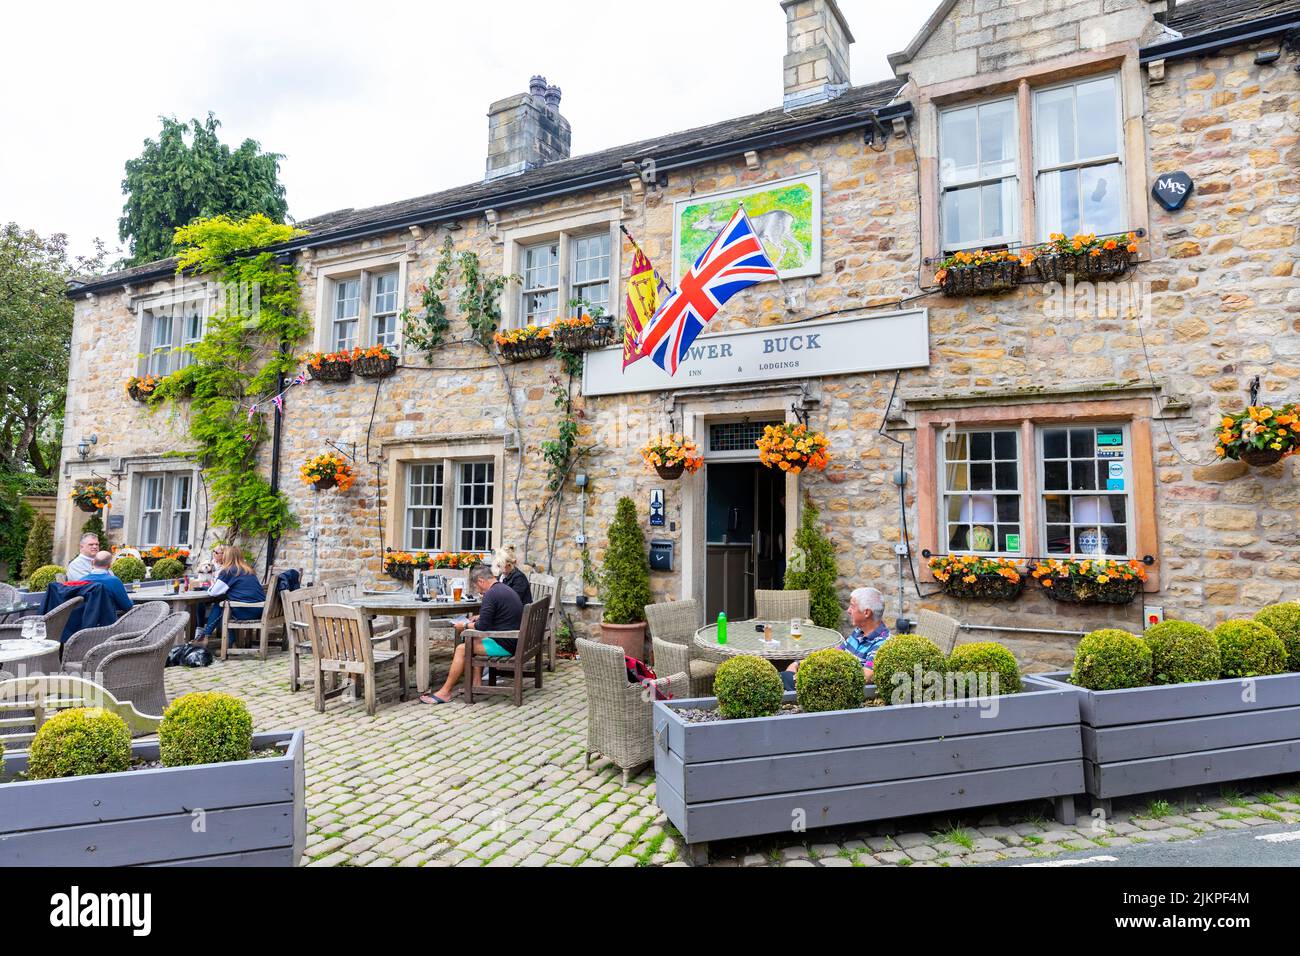 Waddington Village in the Ribble valley of Lancashire and The Lower Buck Inn public house,England,Uk, pub exterior with Union Jack flying, summer 2022 Stock Photo